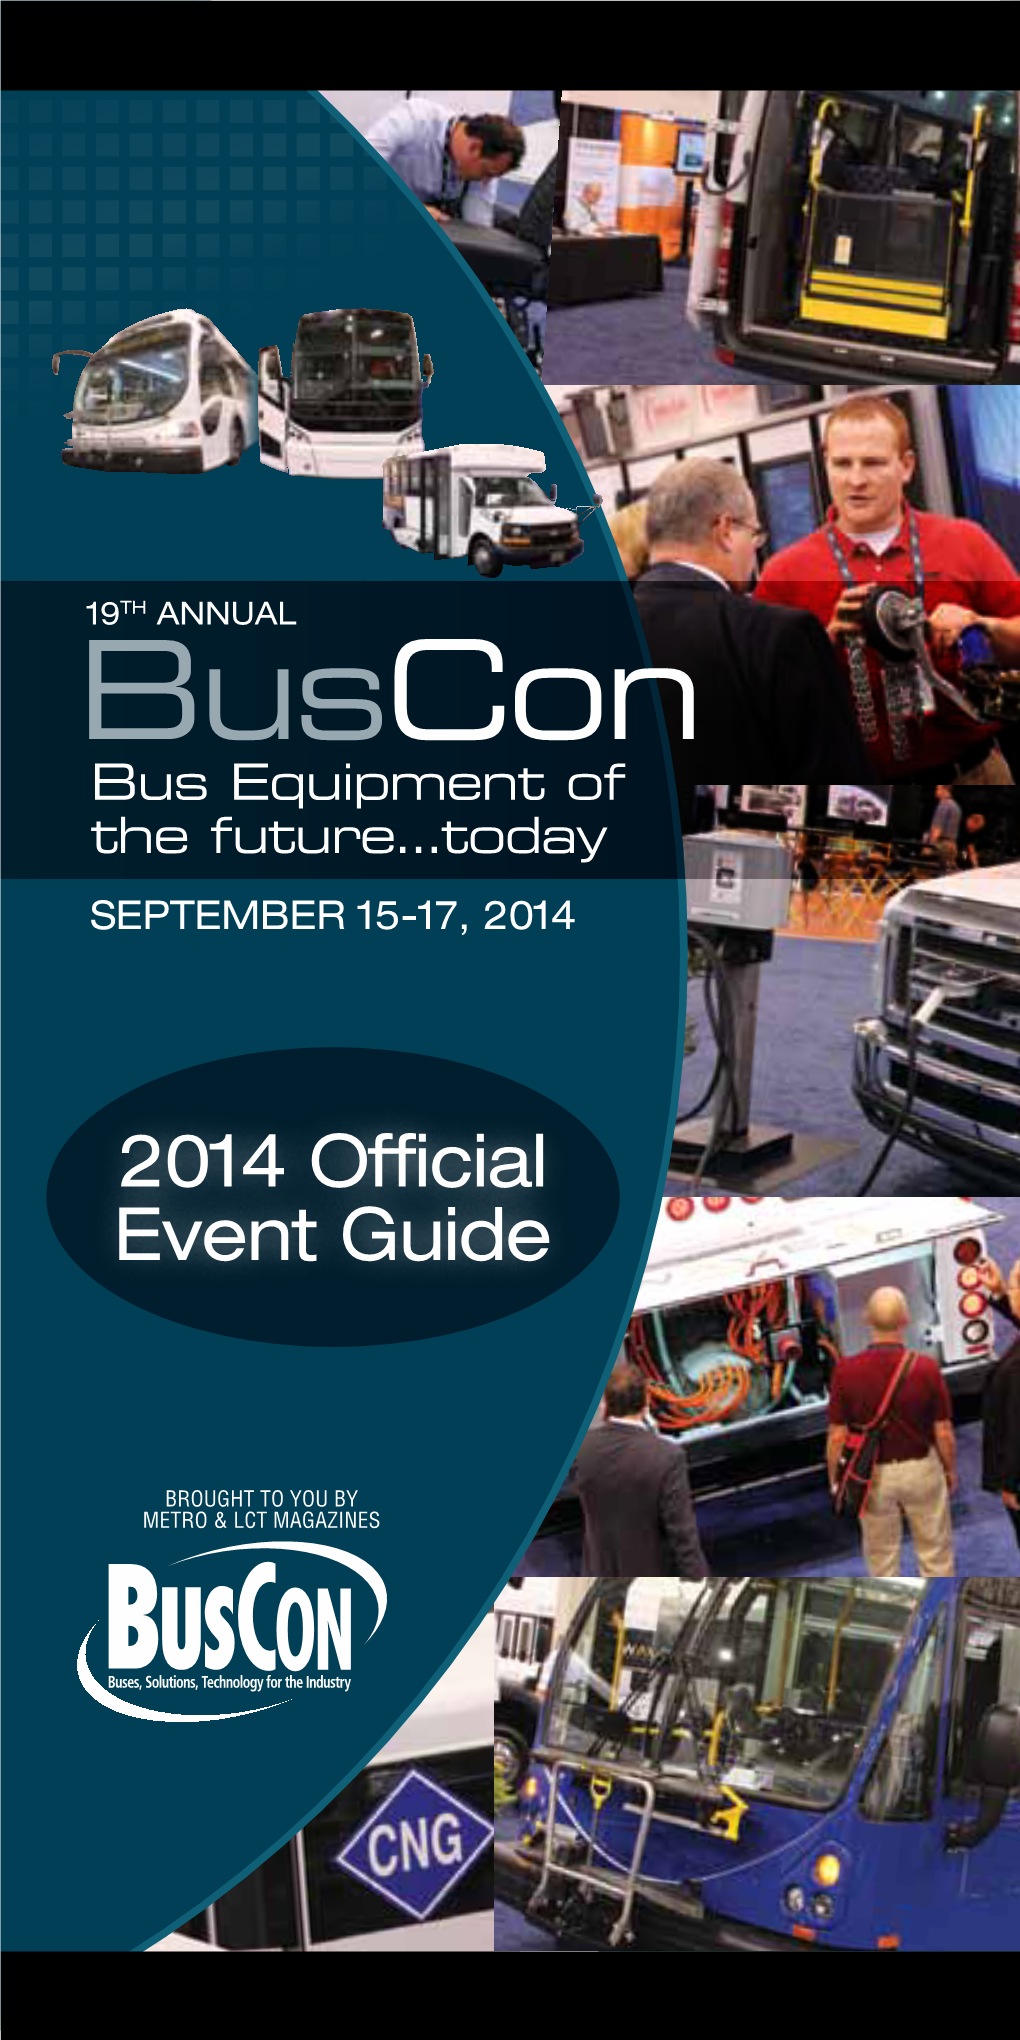 Buscon Bus Equipment of the Future…Today September 15-17, 2014